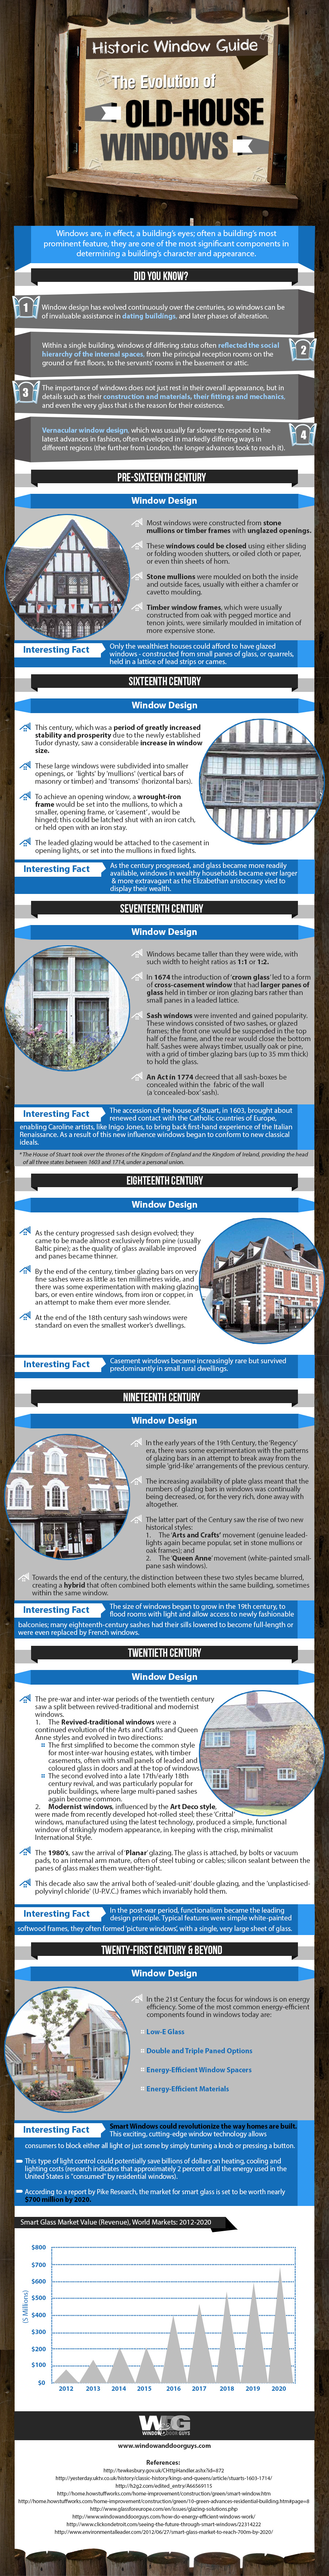 Historic Window Guide: The Evolution of Old-House Windows